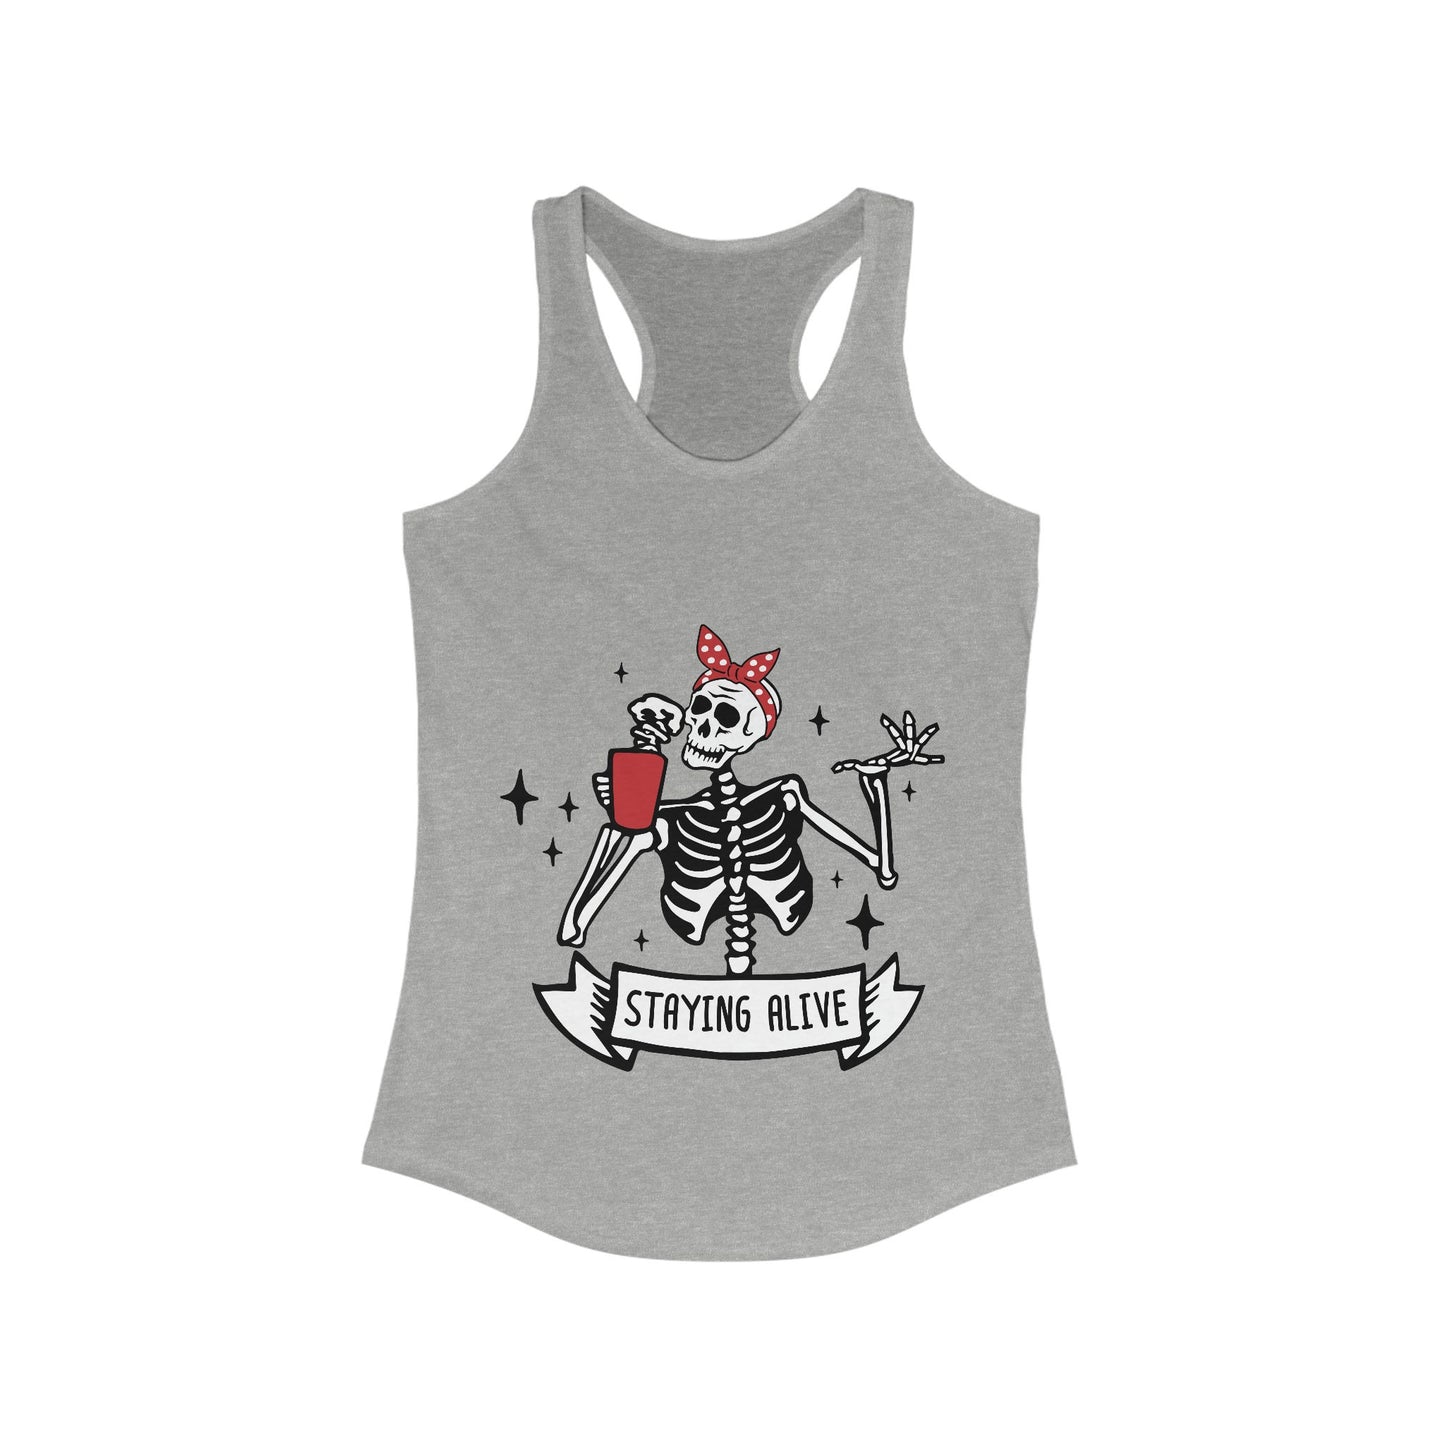 Stay Caffeinated in Style: Women's Ideal Racerback Tank for Coffee Lovers!